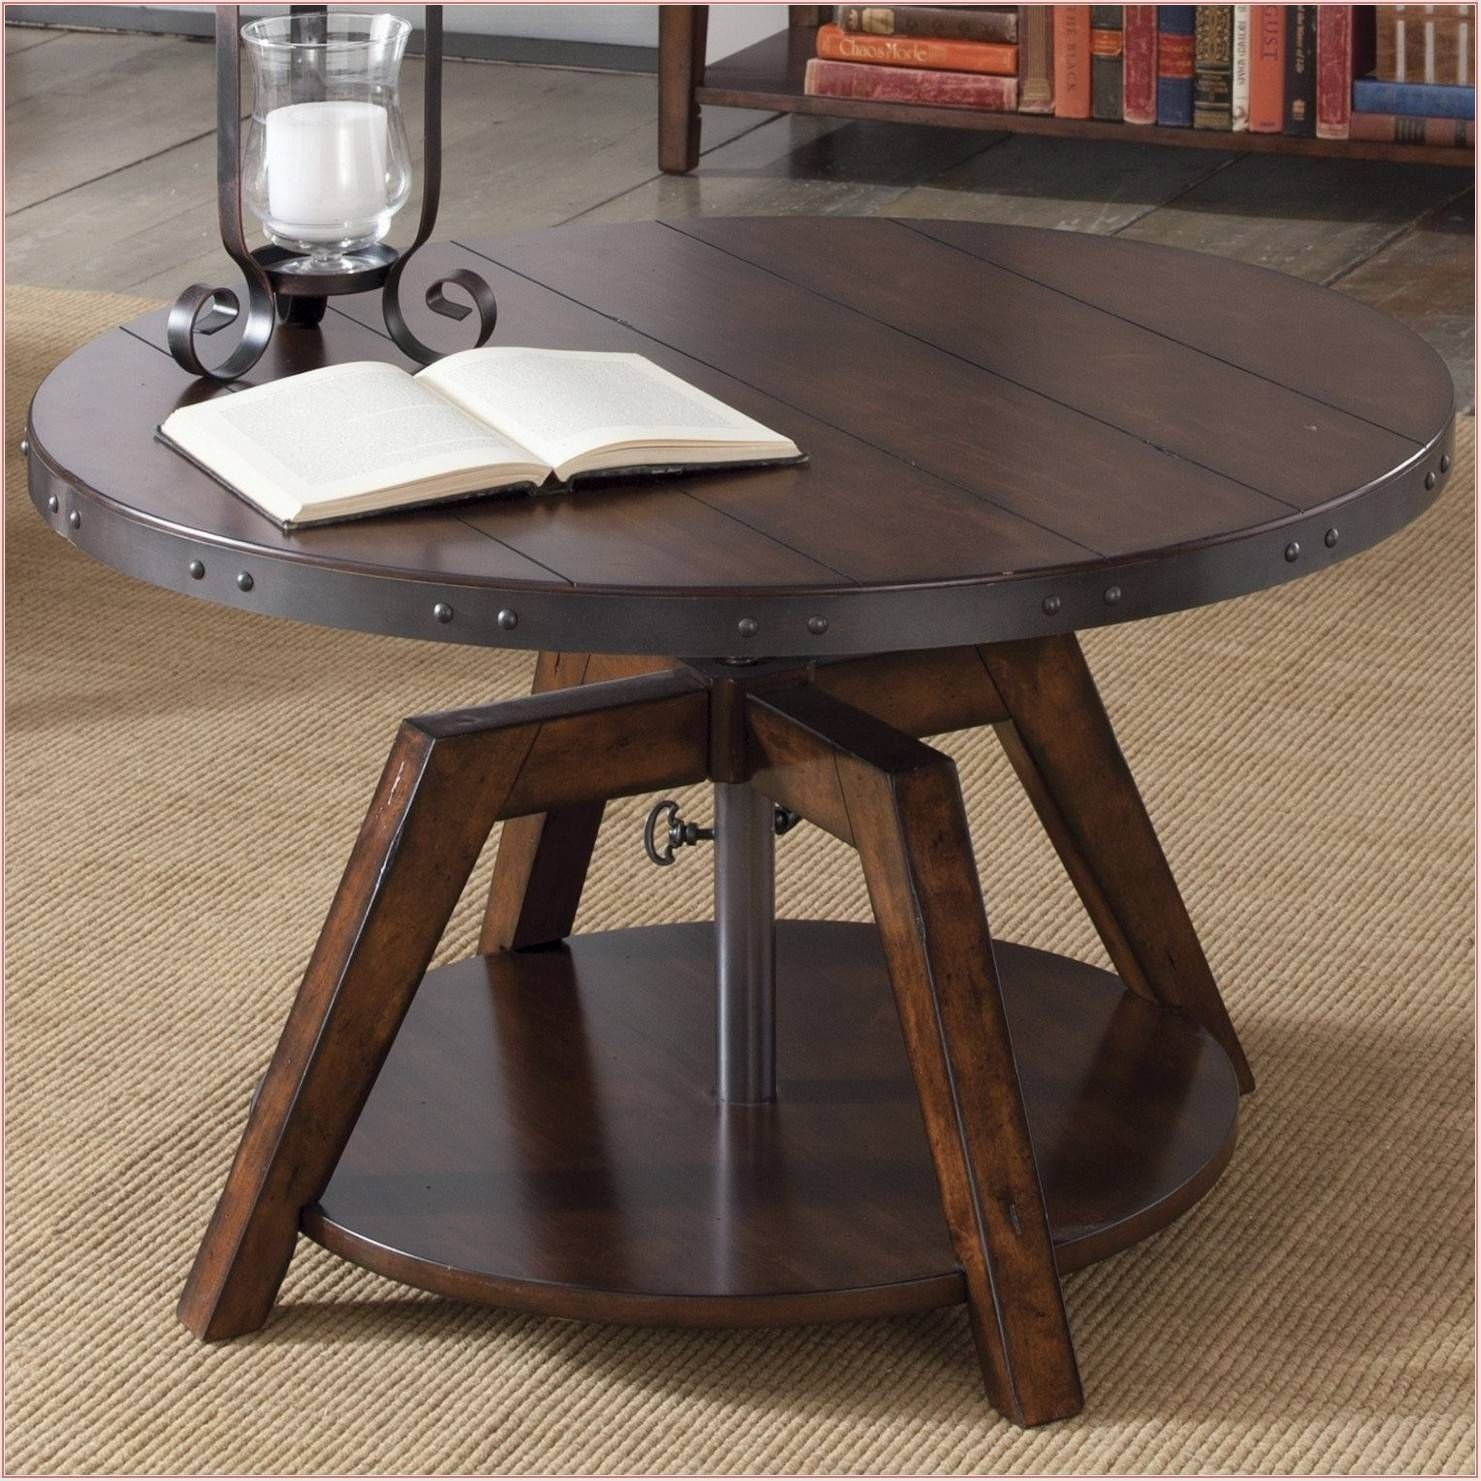 50 Amazing Convertible Coffee Table To Dining Table Up To 70 Off with size 1481 X 1481